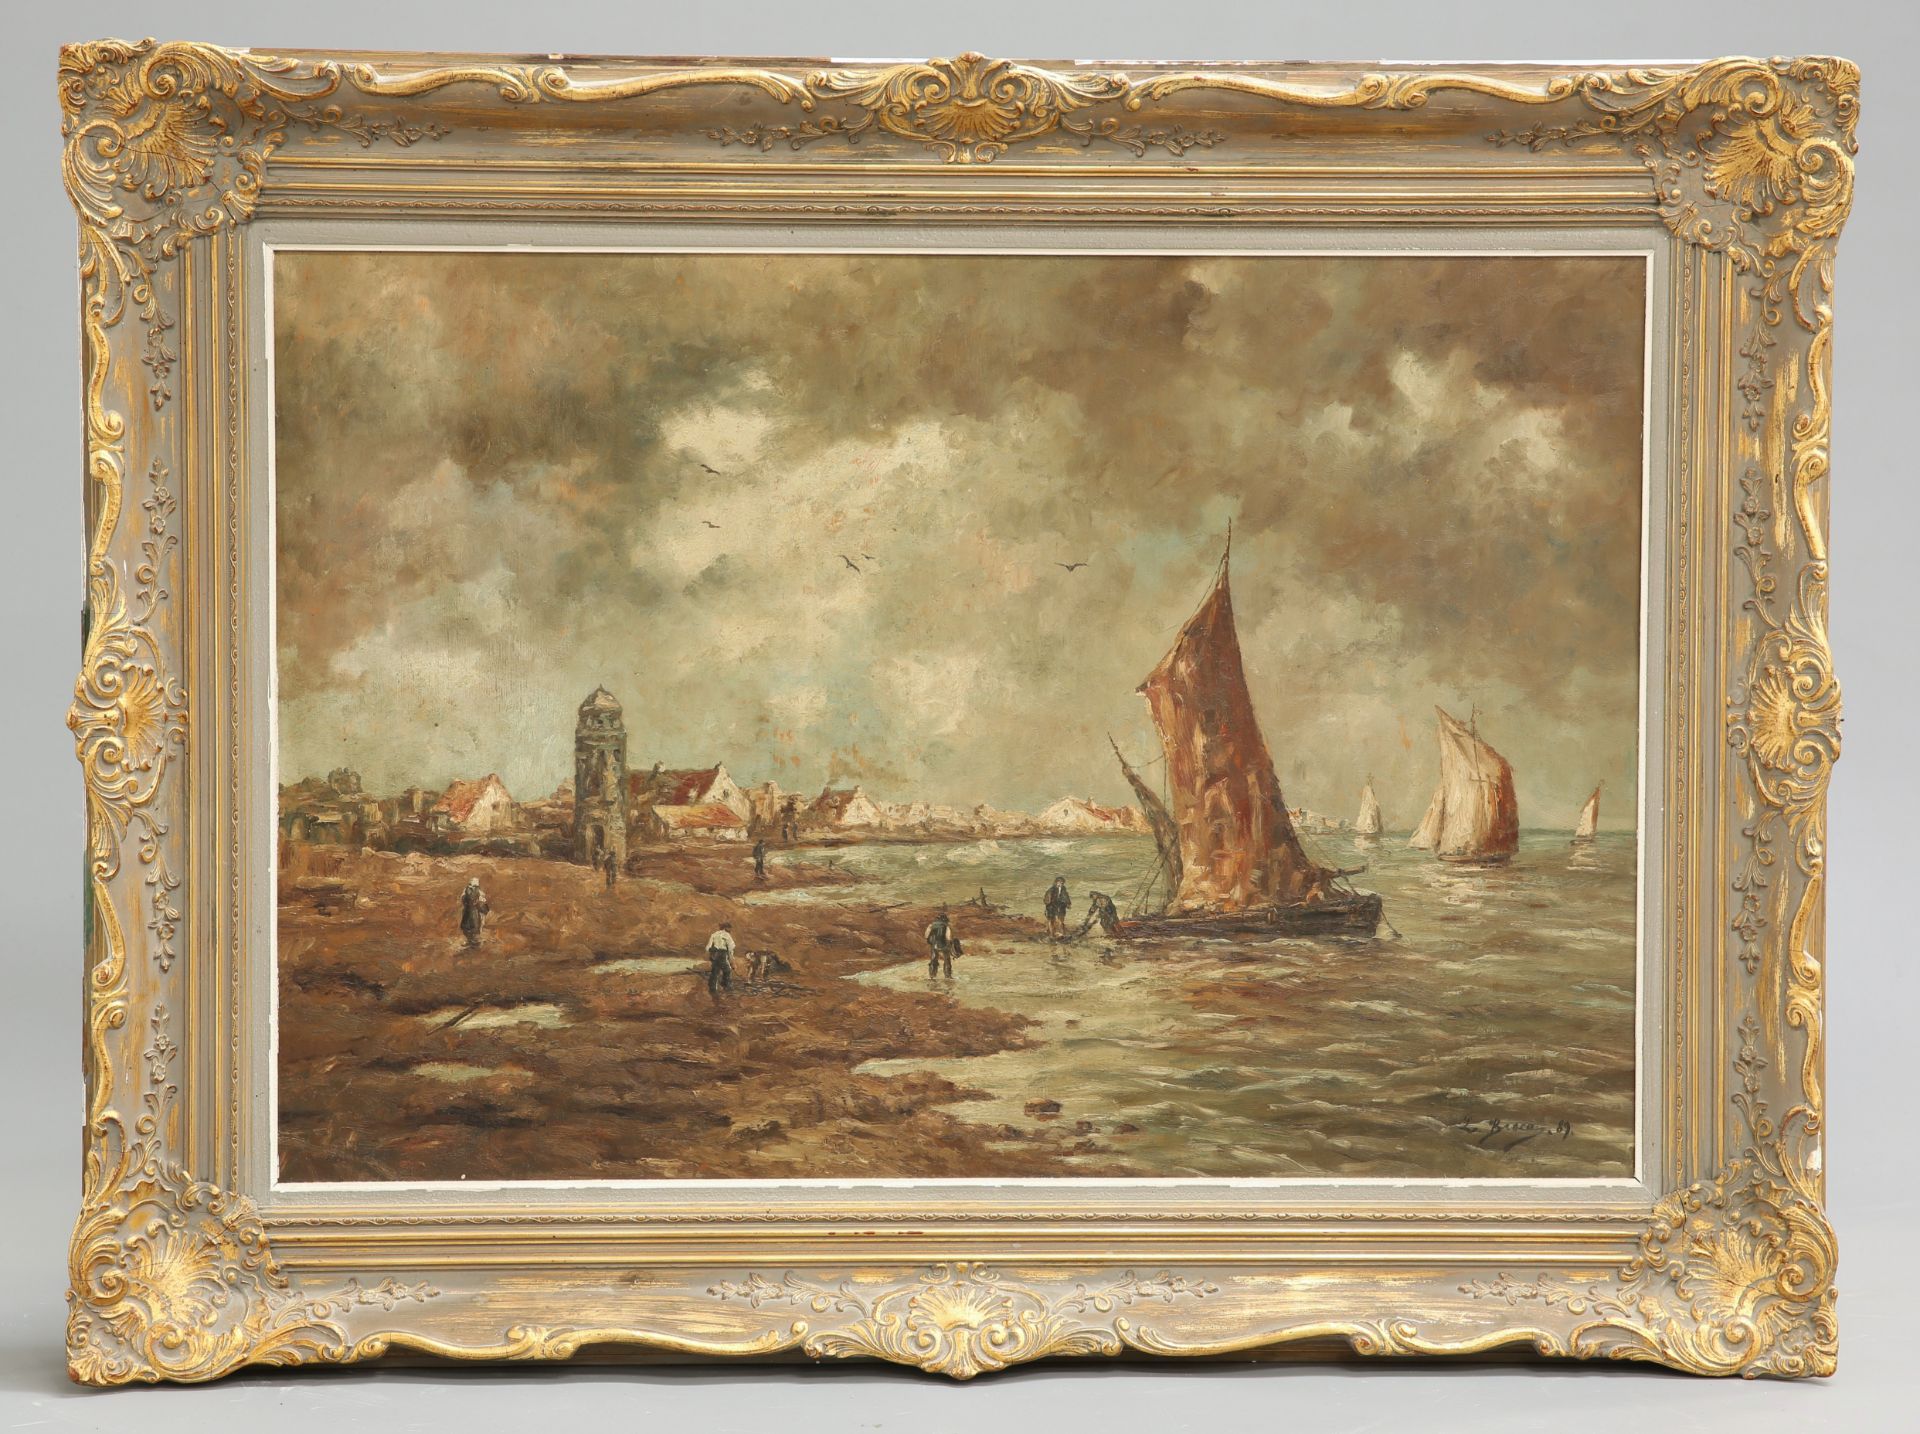 FLEMISH SCHOOL, FISHERMEN AND BOATS ON THE SHORE